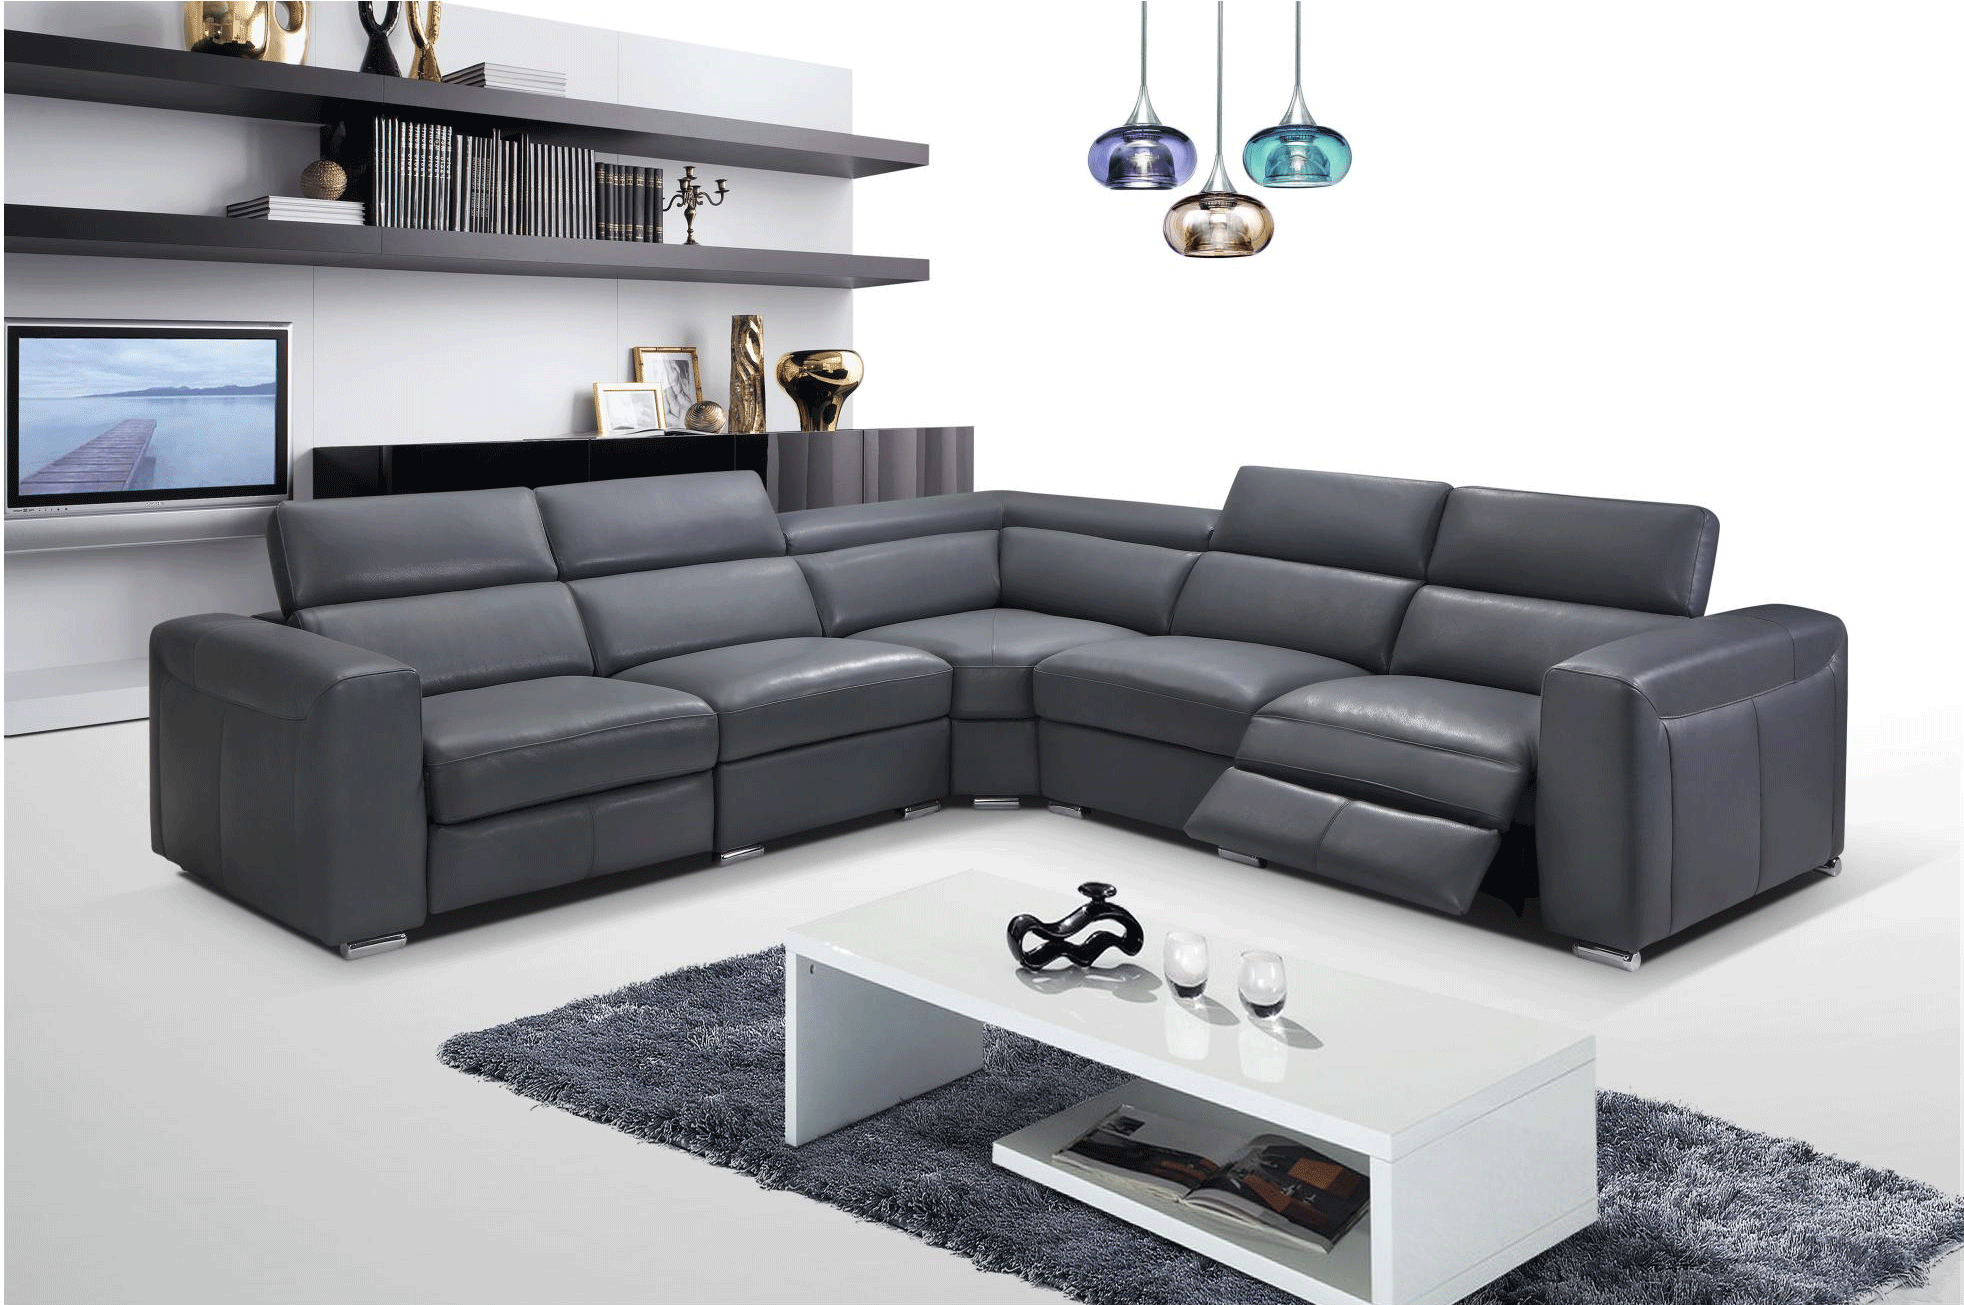 Living Room Furniture Sleepers Sofas Loveseats and Chairs 2919 Sectional w/ recliners